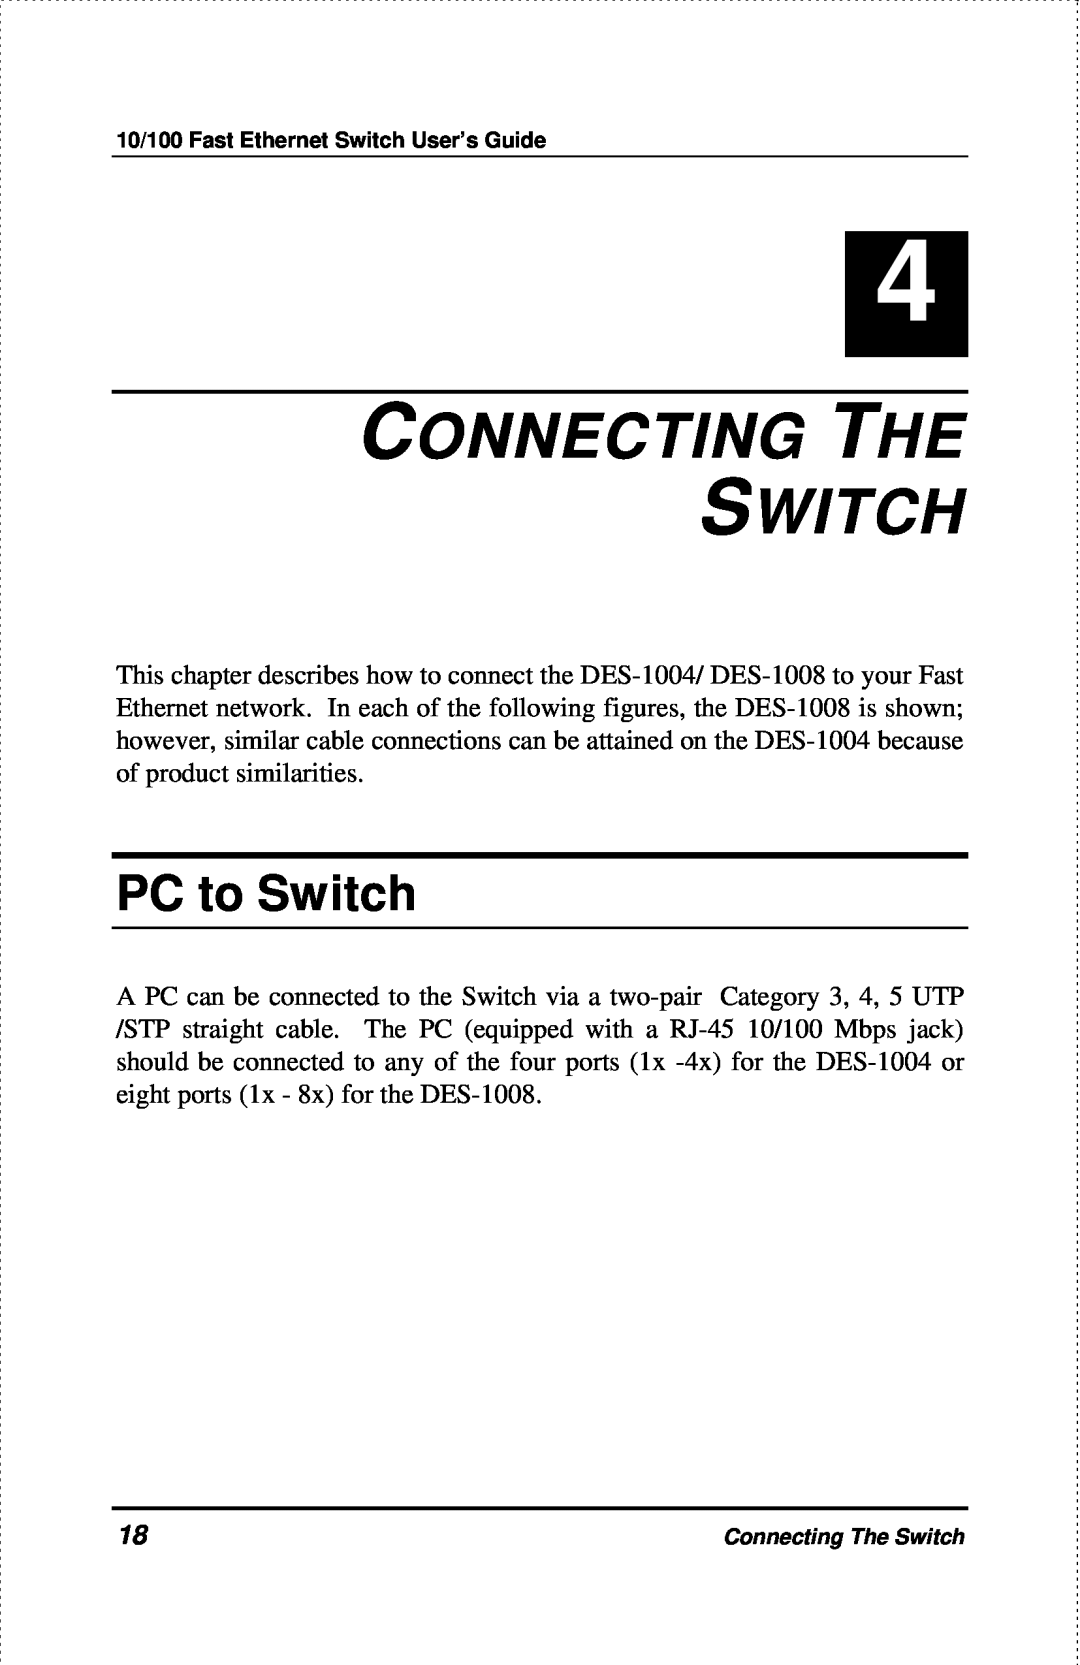 D-Link DES-1004 manual Connecting The Switch, PC to Switch 